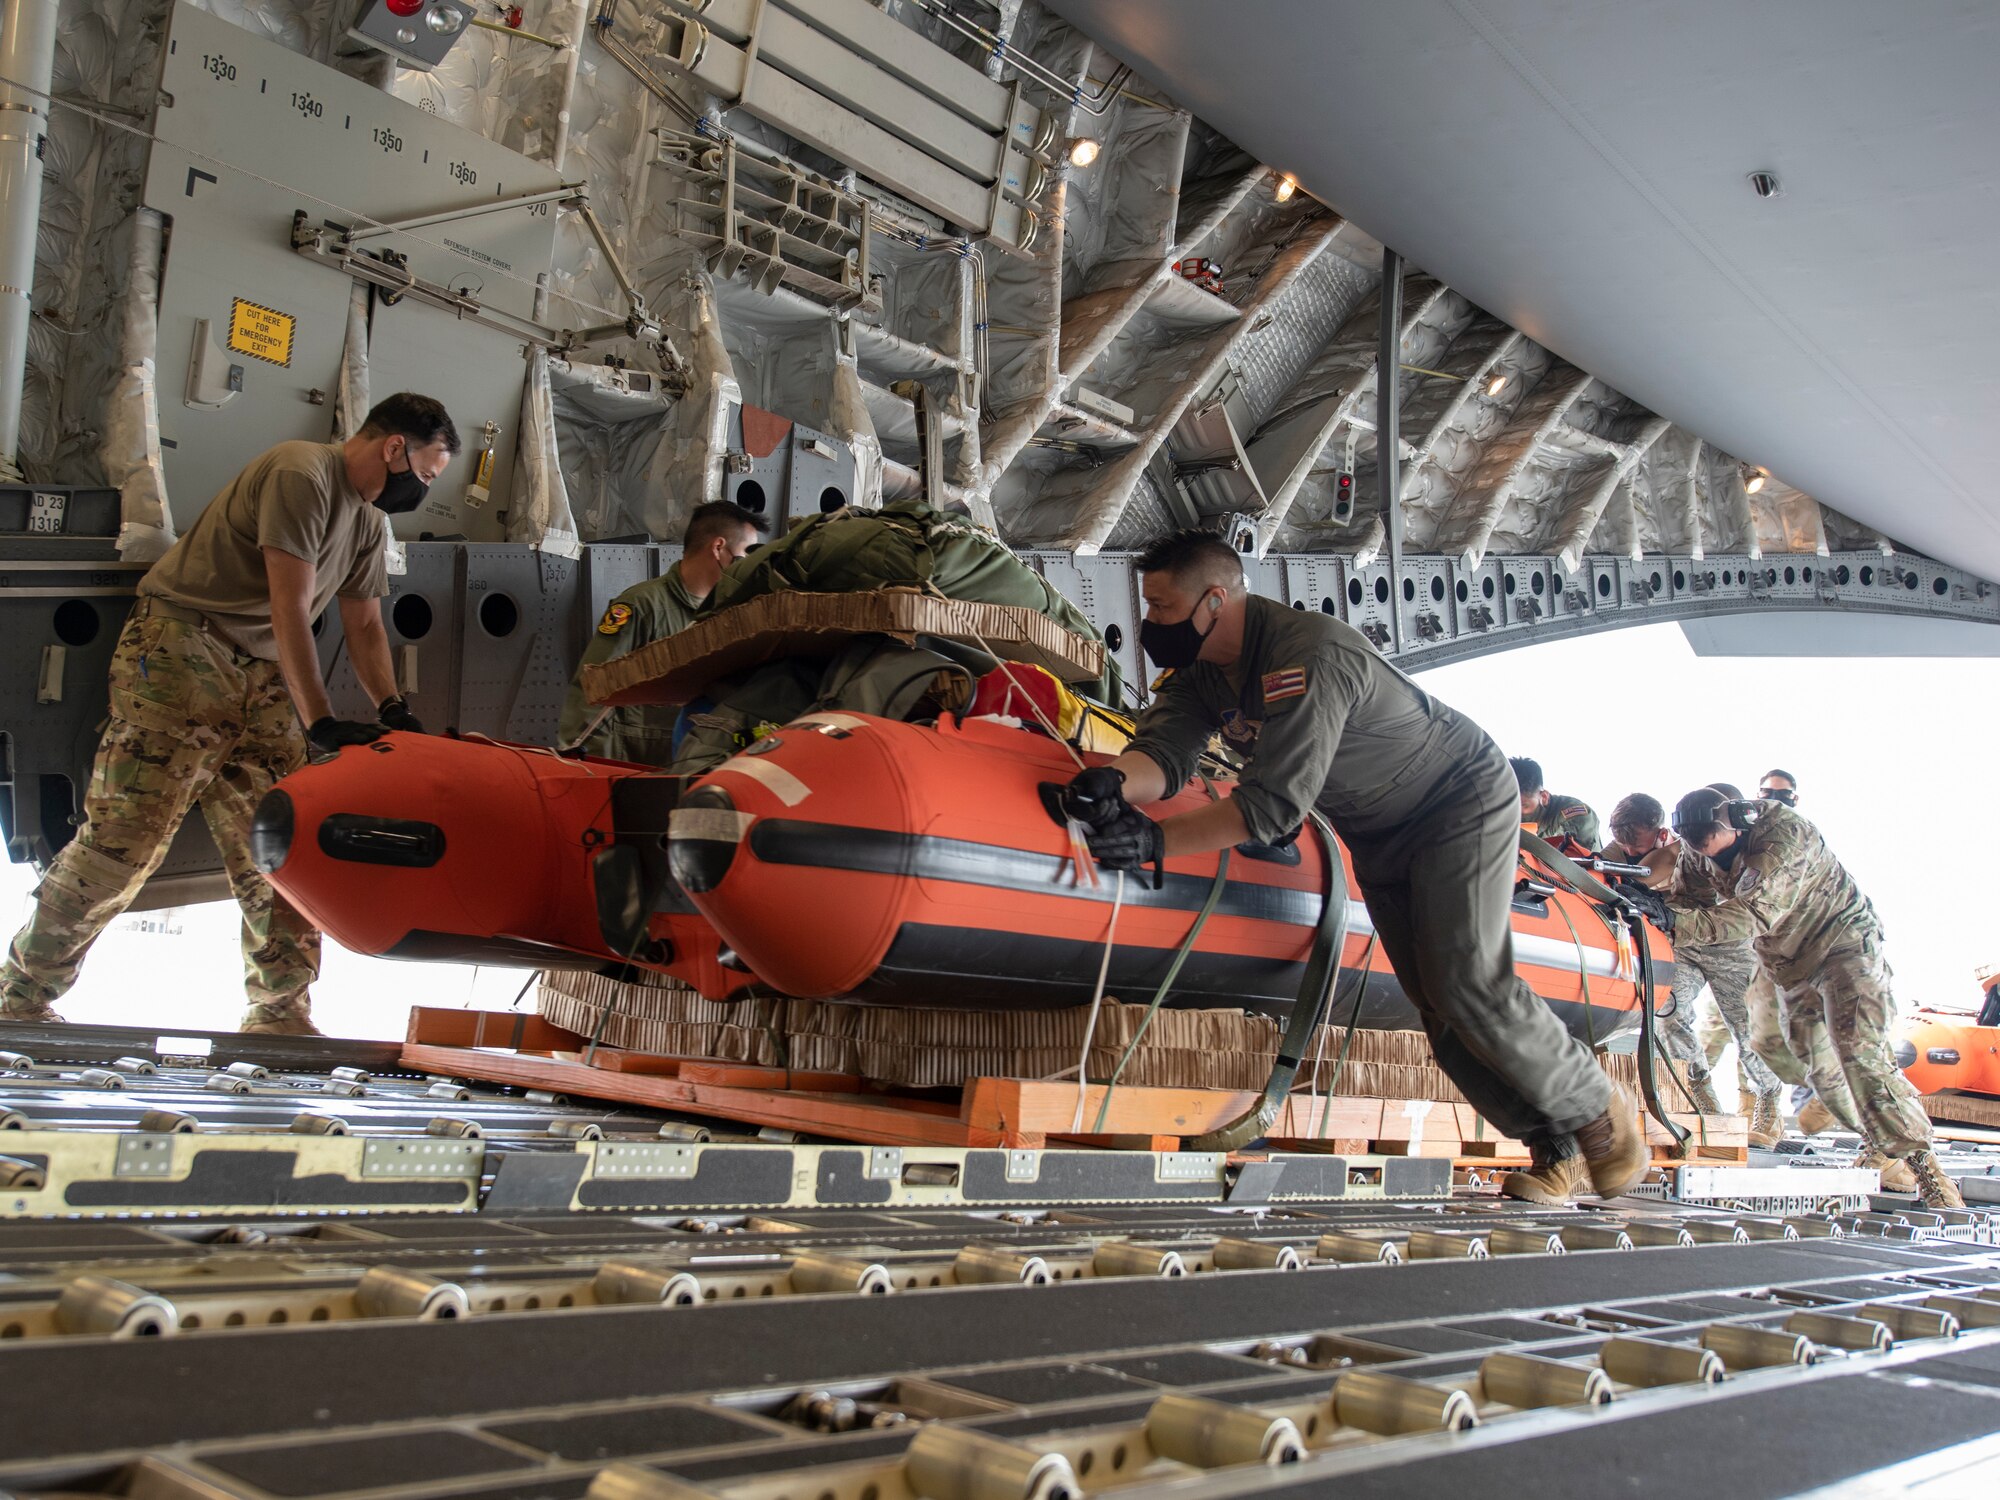 U.S. Air Force Airmen, assigned to the Hawaii Air National Guard, load pararescuemen equipment onto a C-17 Globemaster III, May 26, 2020 at Joint Base Pearl Harbor-Hickam. The Airmen pre-rigged the C-17 in order to be able to quickly respond to astronaut rescue in the Pacific region in support of a manned space flight launch on May 30. (U.S. Air National Guard photo by Senior Airman Orlando Corpuz)